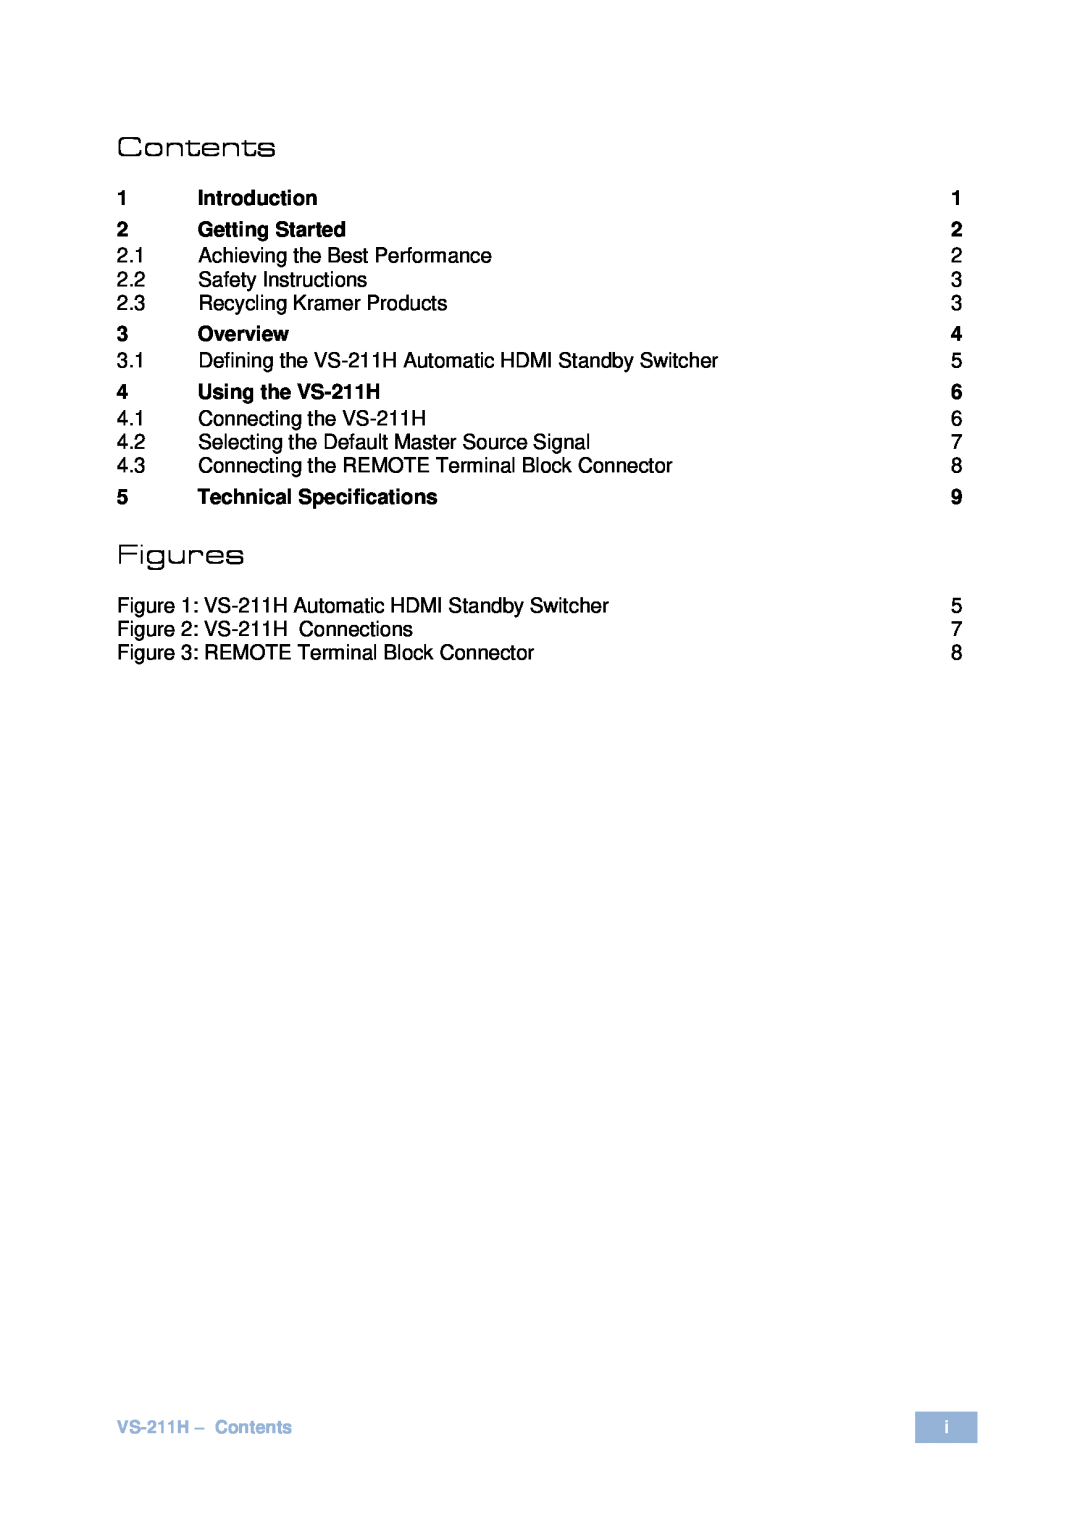 Kramer Electronics user manual Contents, Figures, Introduction, Getting Started, Overview, Using the VS-211H 